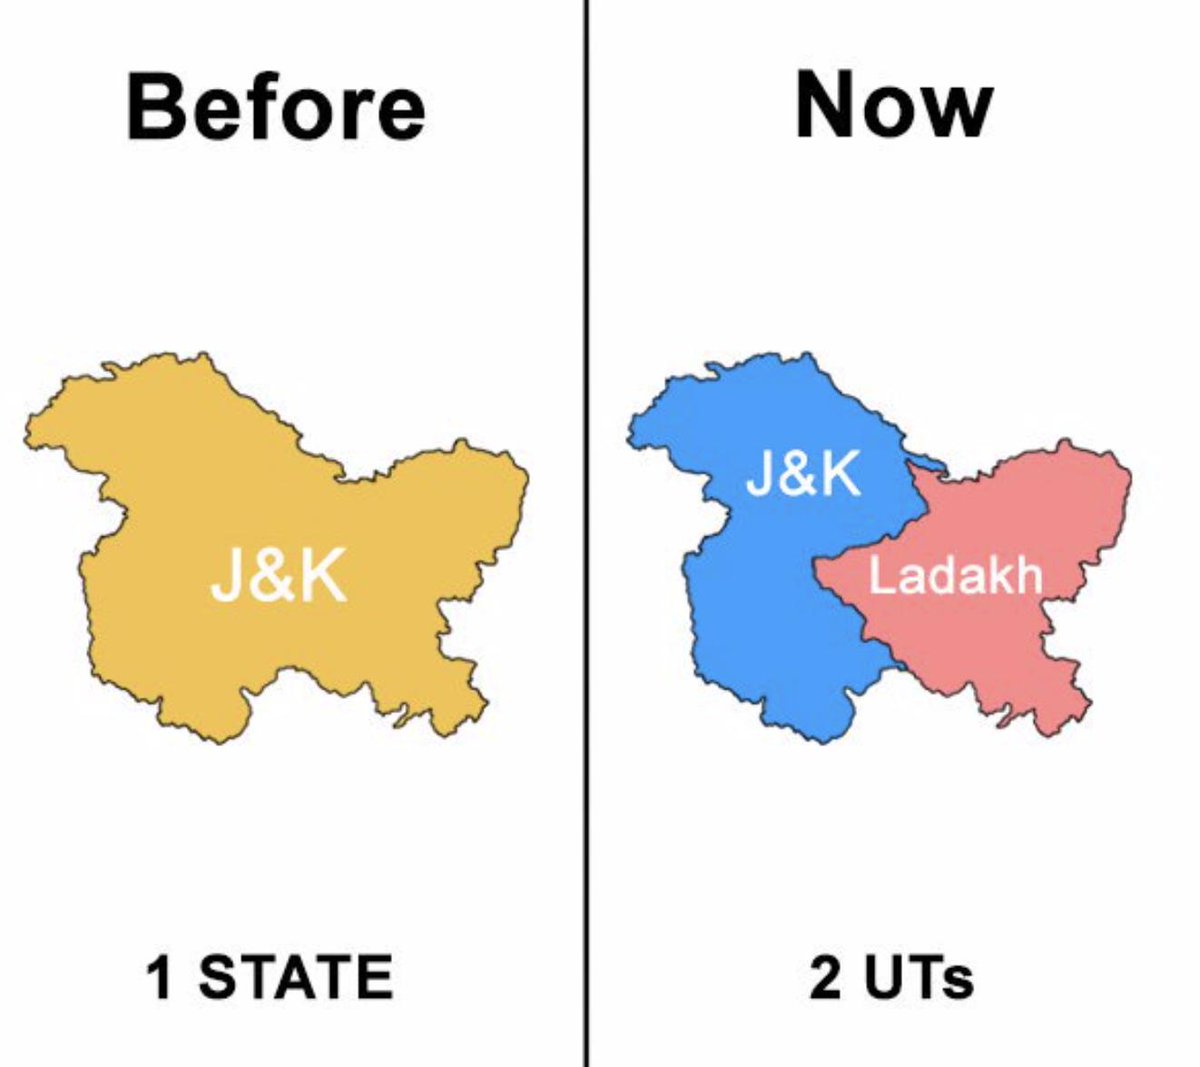 I almost forgot: to this list we now have to add two newly minted Union Territories. J&K and Ladakh. The evolution continues ...